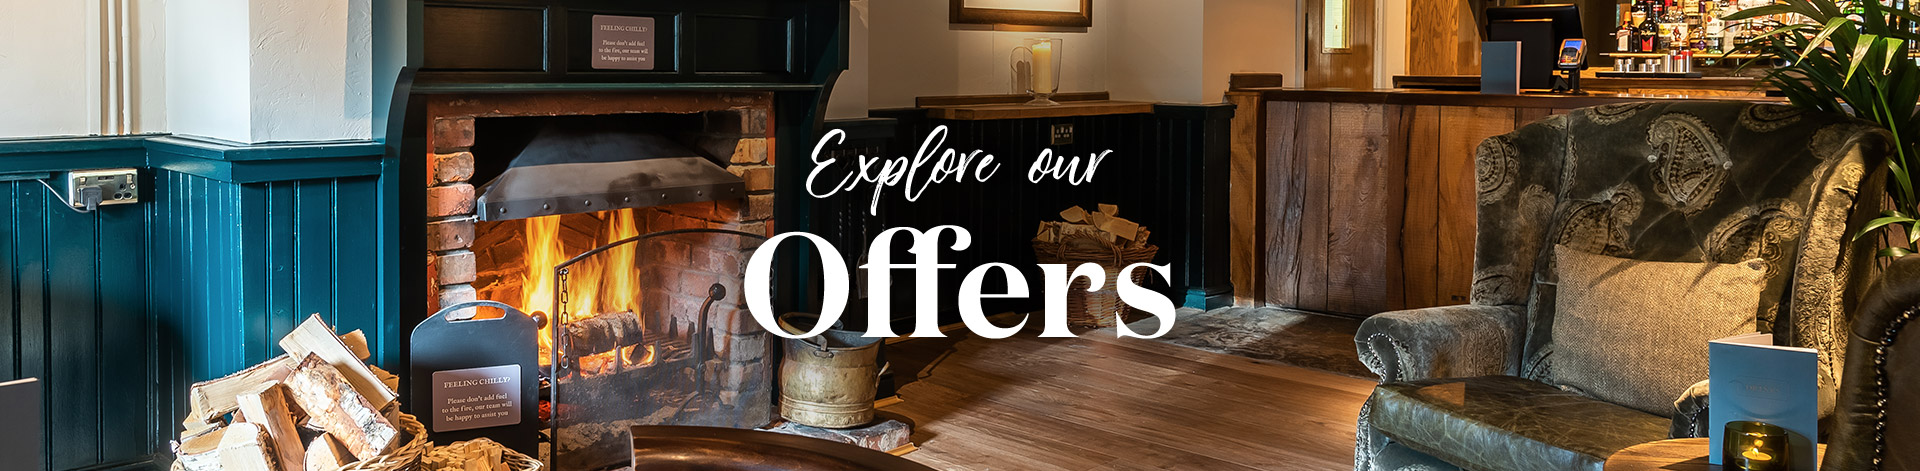 Our latest offers at The Glover Arms